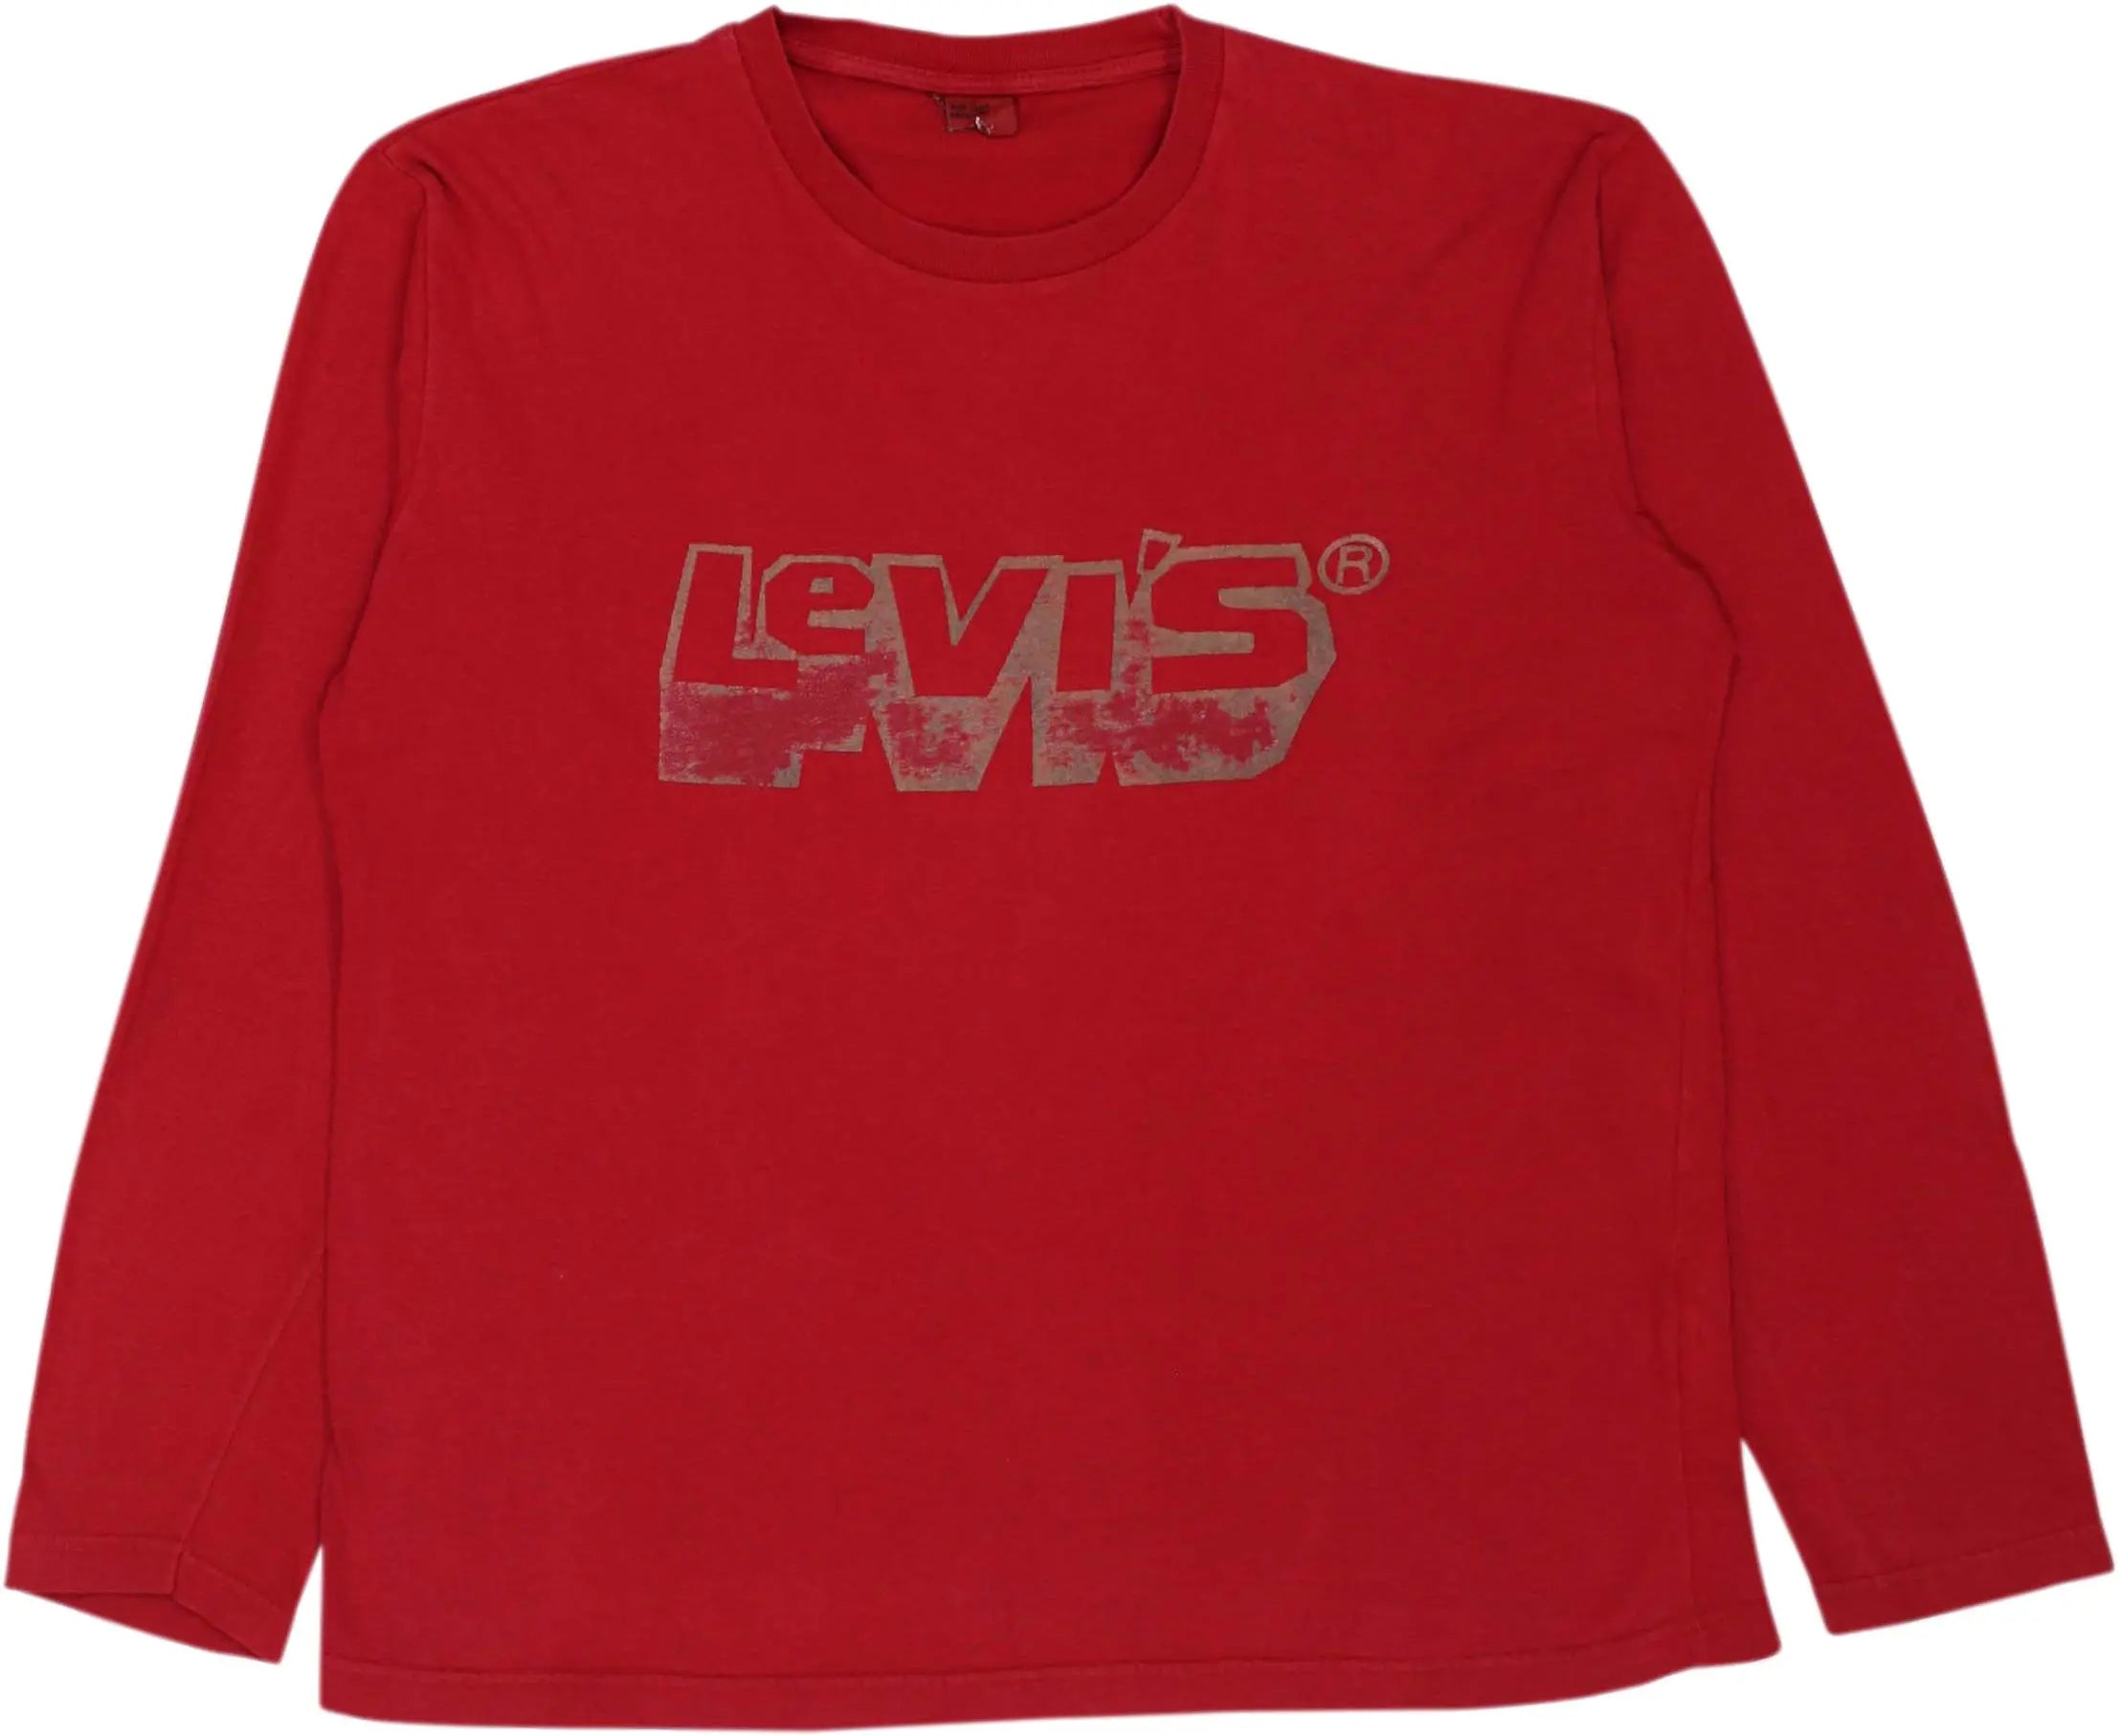 Levi's - Red Long Sleeve T-shirt by Levi's- ThriftTale.com - Vintage and second handclothing